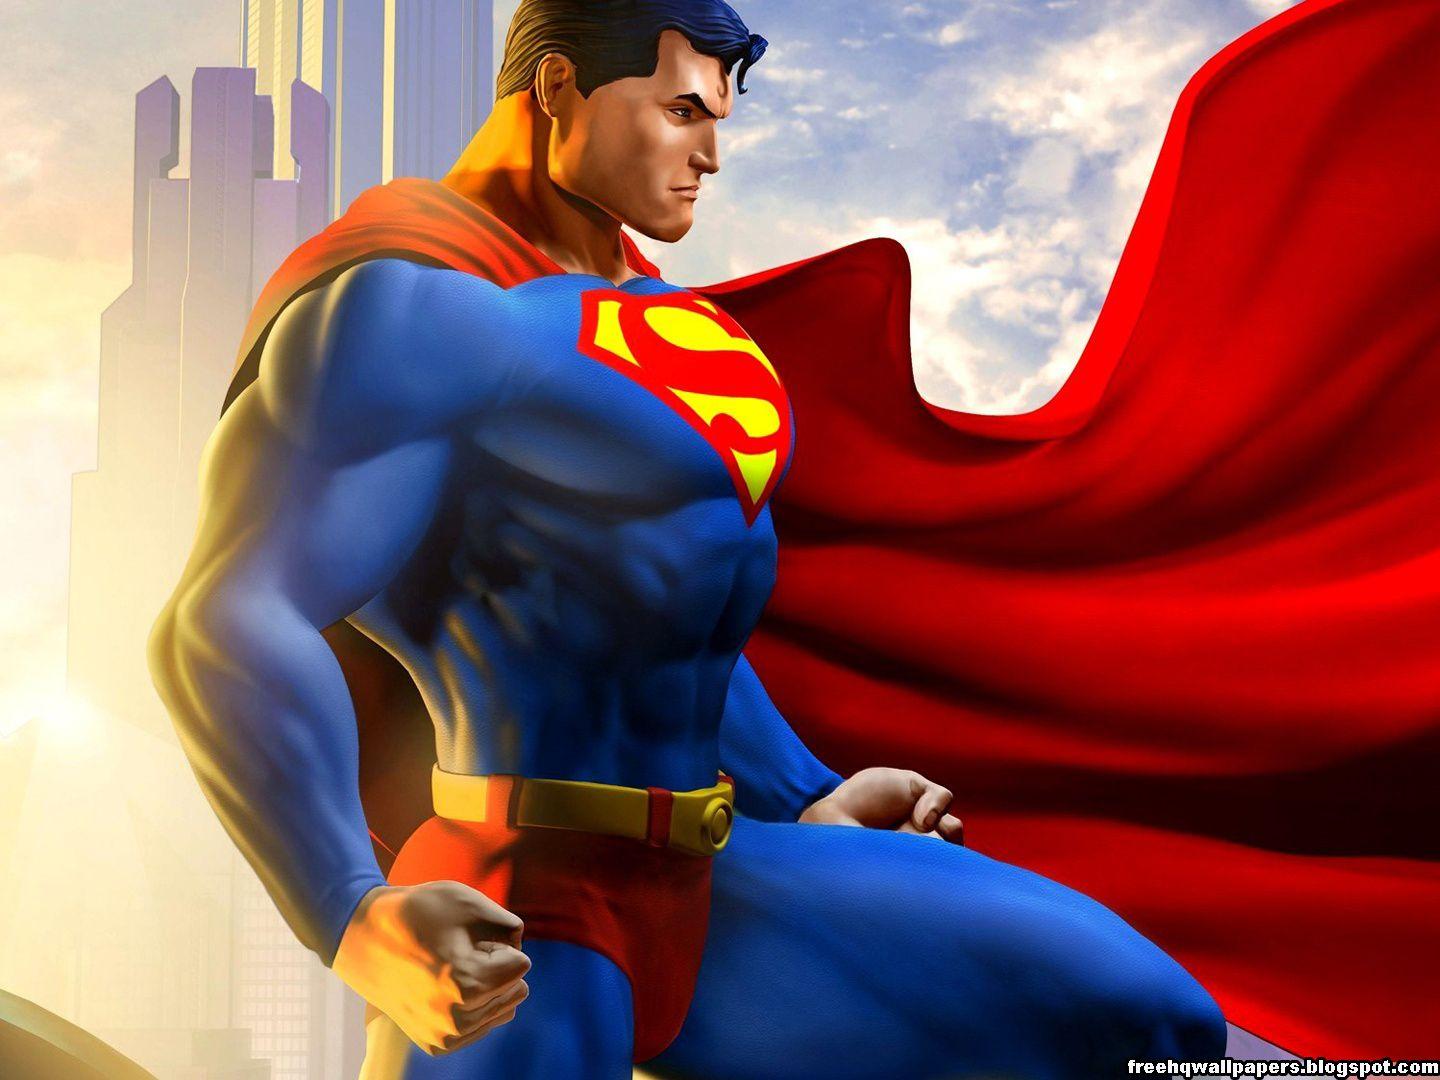 SUPERMAN MAN OF STEEL WALLPAPERS. Art and Entertainment Blog